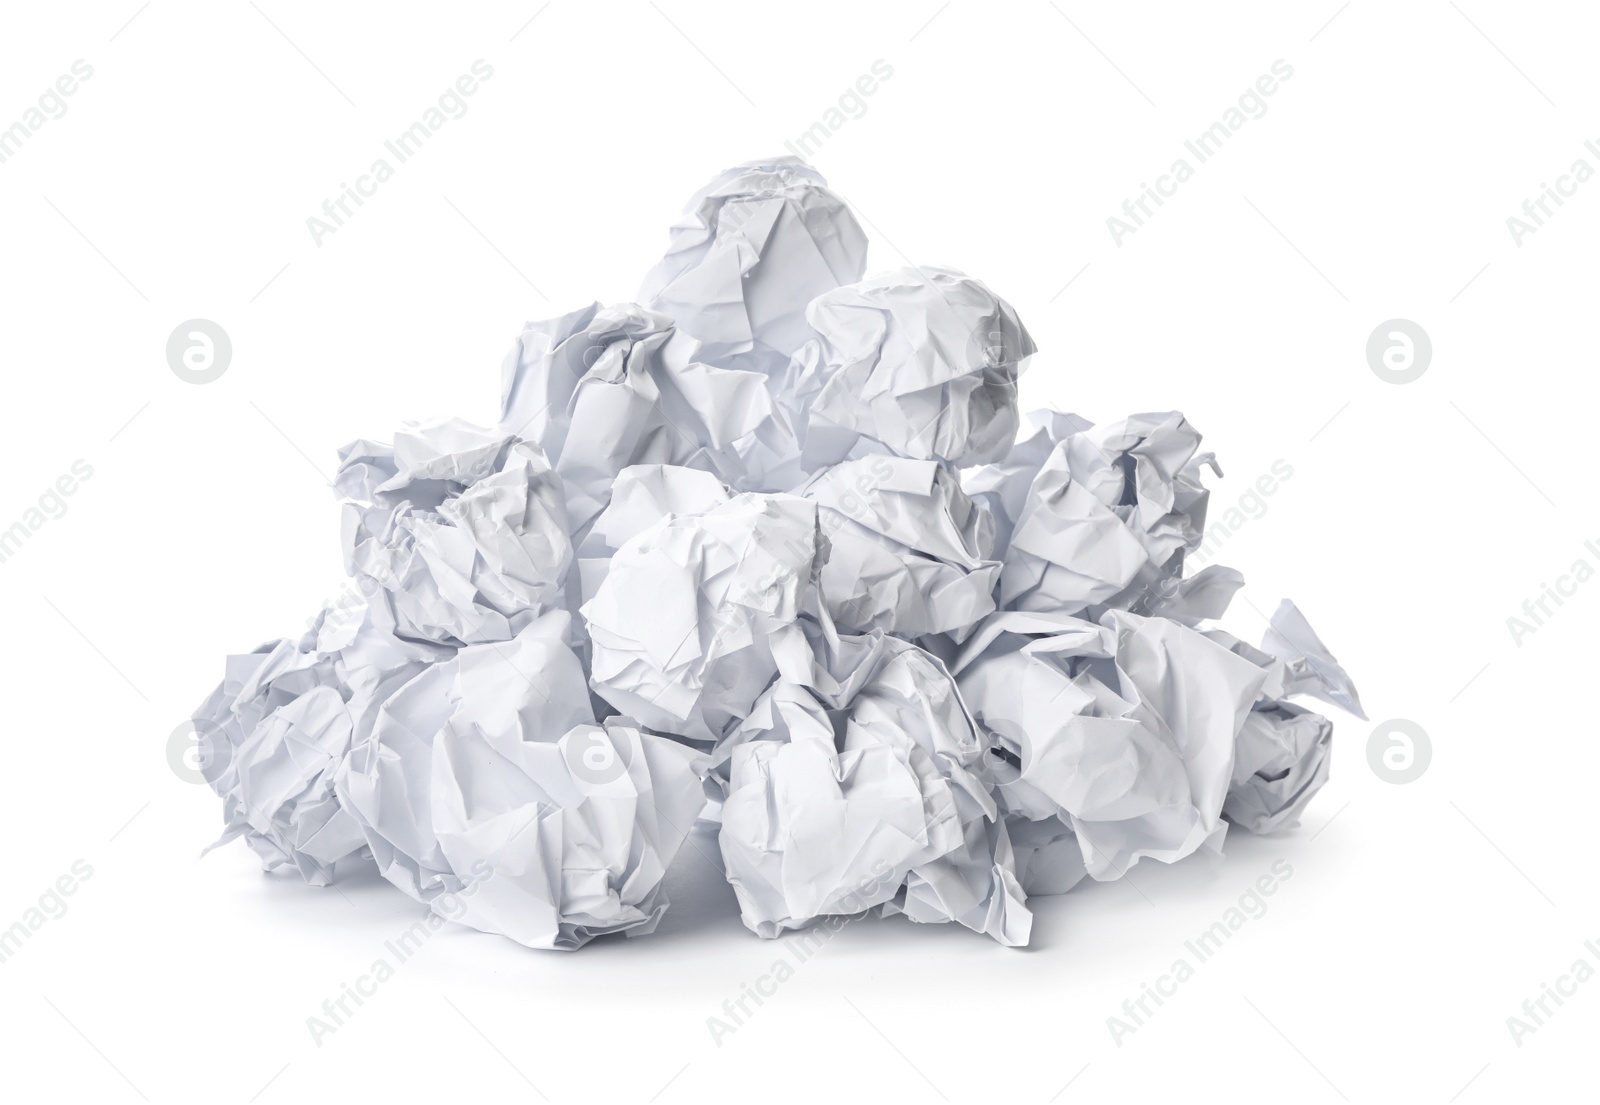 Photo of Pile of crumpled sheets of paper isolated on white